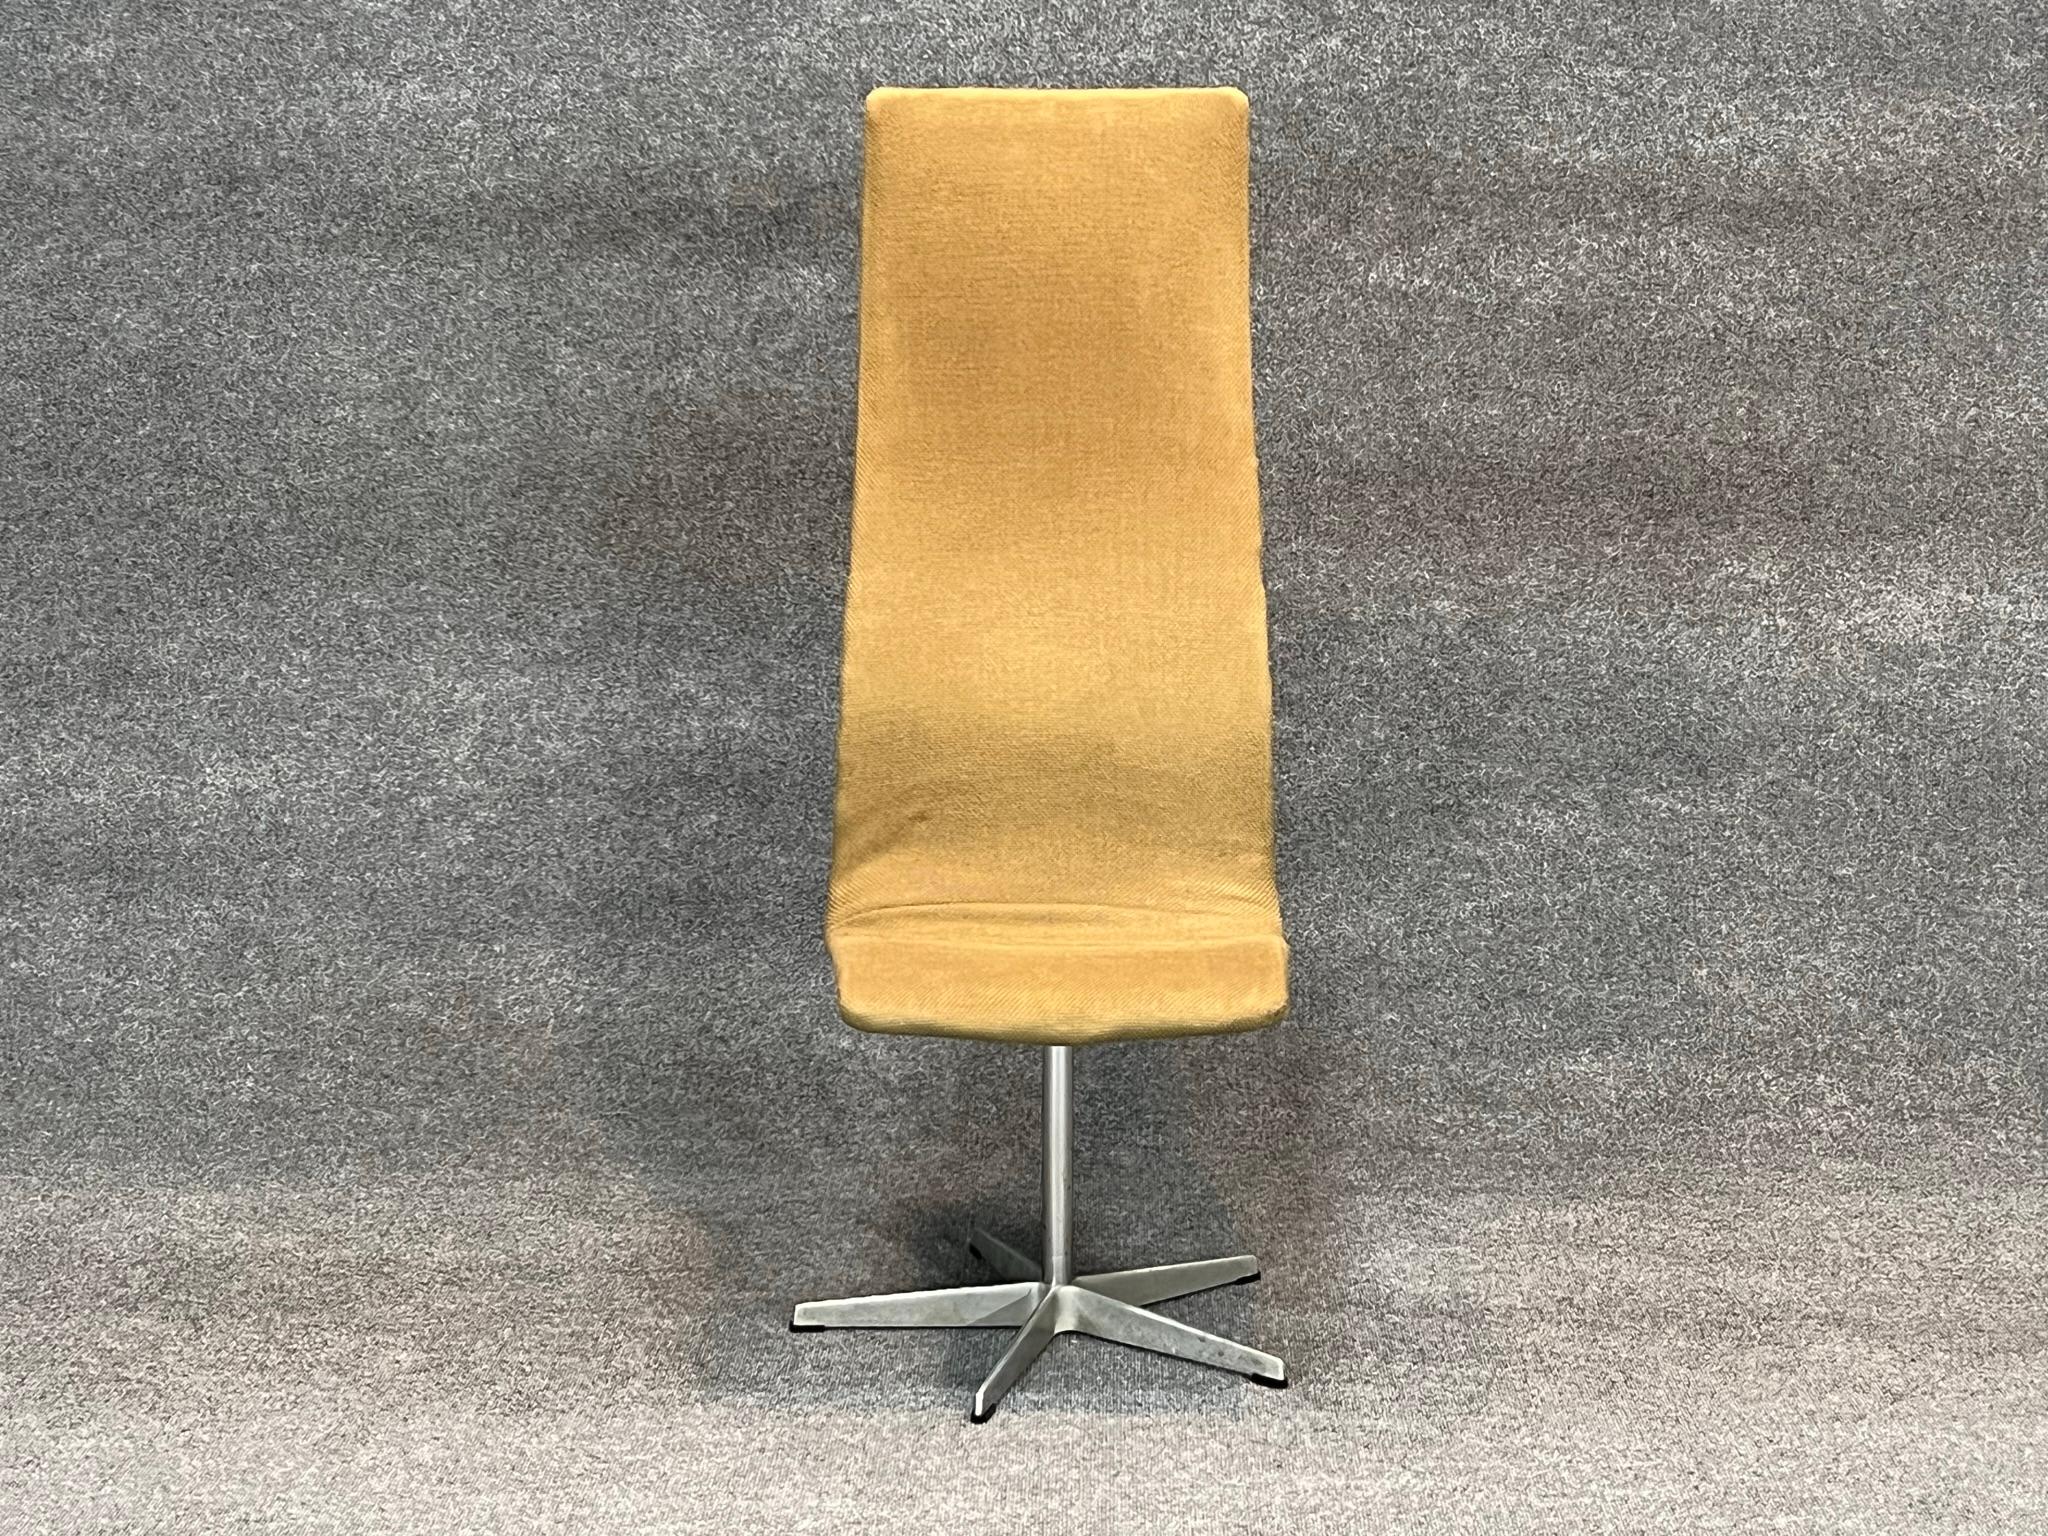 Arne Jacobsen for Fritz Hansen, 'Oxford' high backed desk chair, aluminum, wood, fabric upholstery, United Kingdom, design 1965, recent production.

The original version of the 'Oxford' chair was designed for the professors at St. Catherine’s